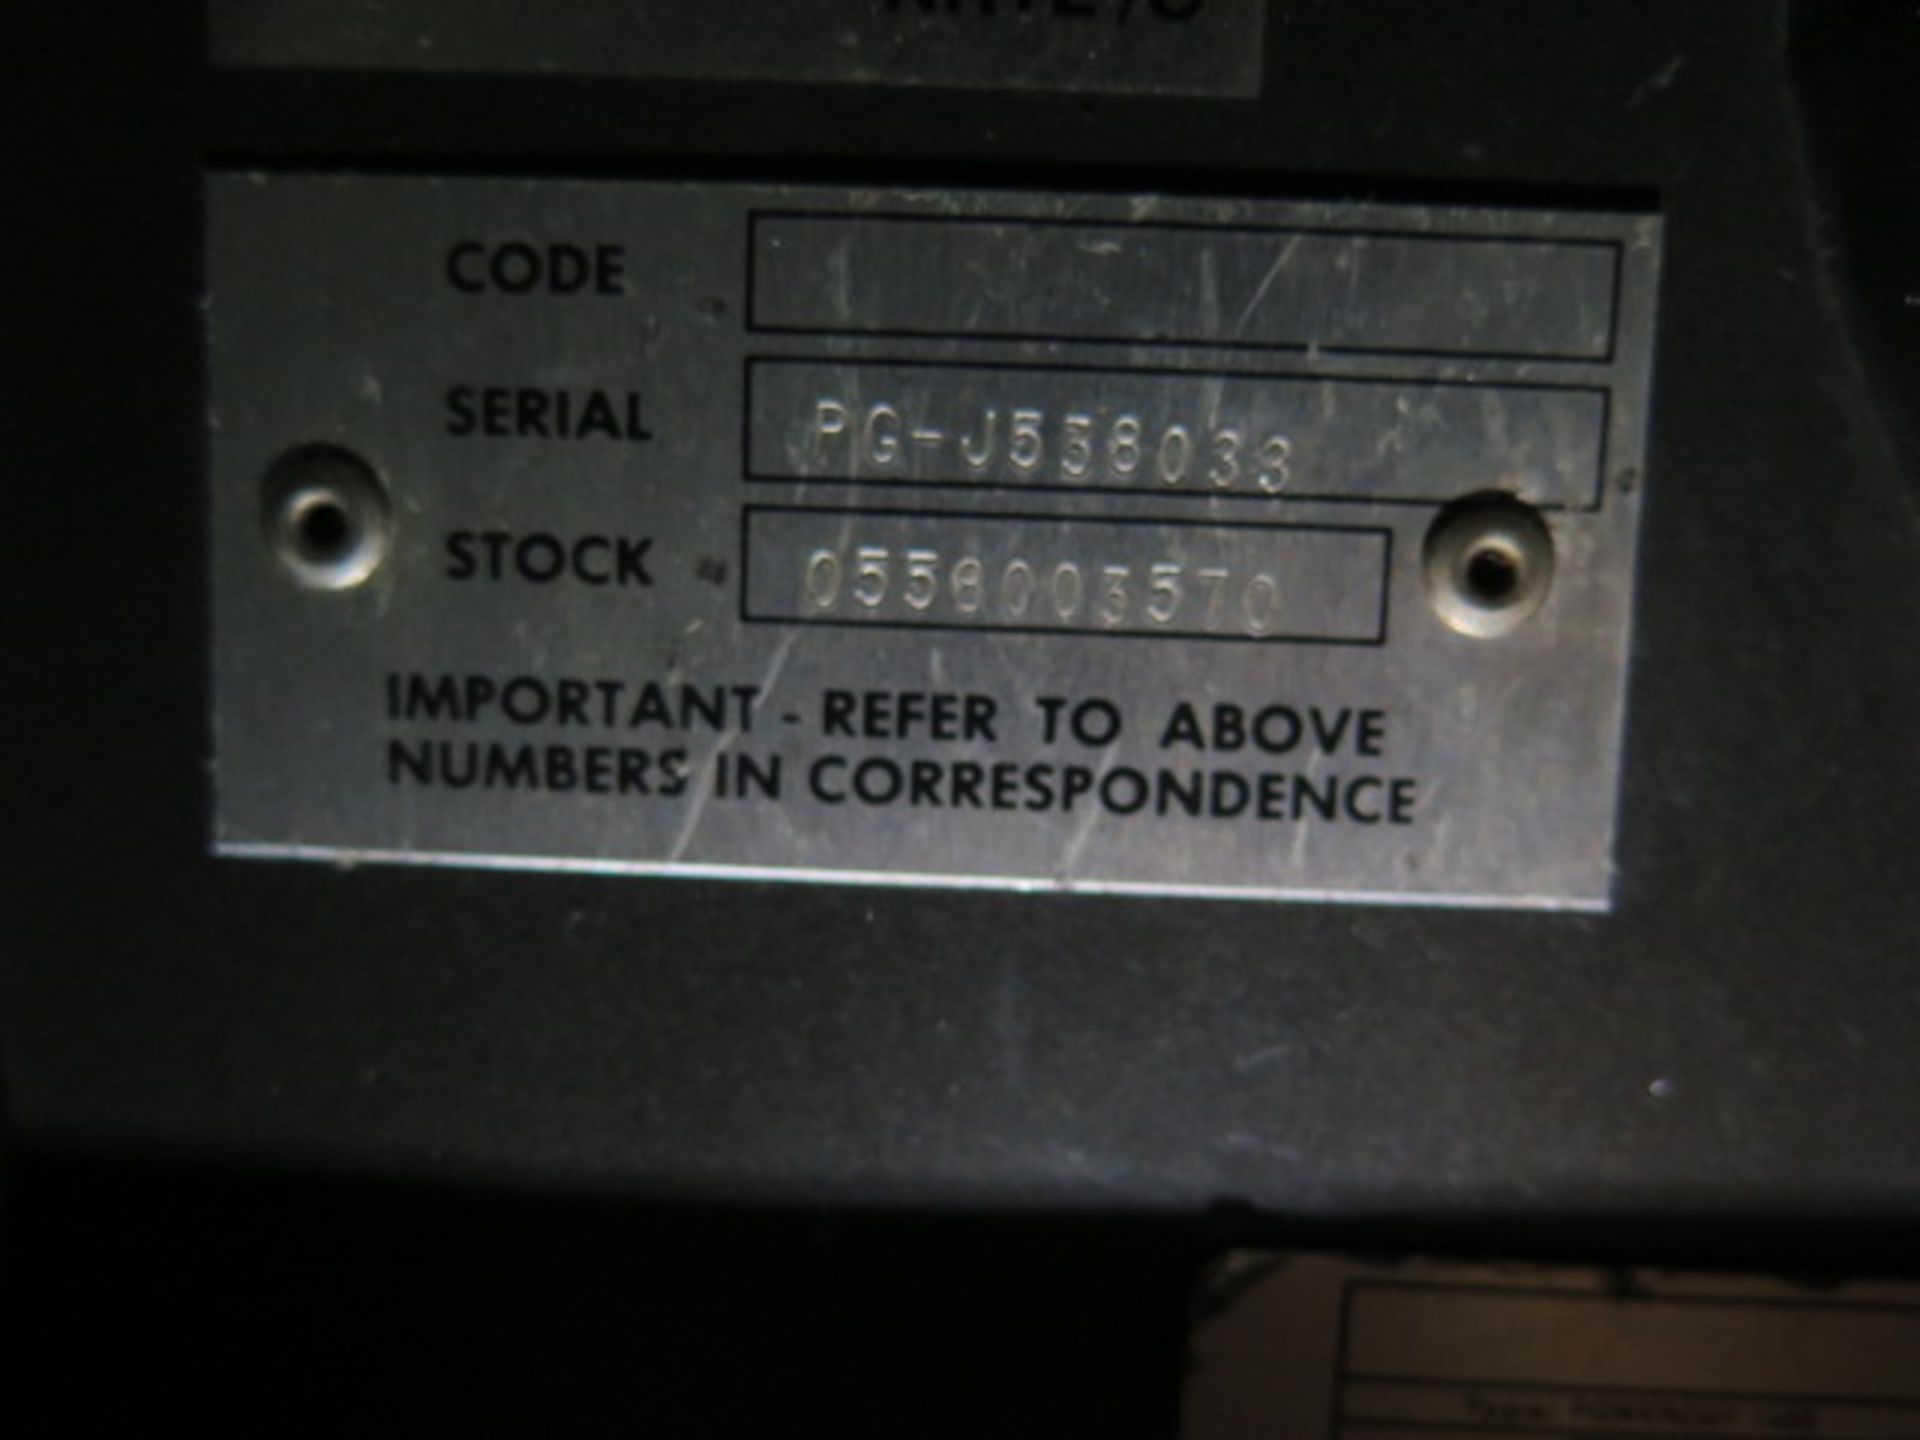 Esab Power Cut 1500 Plasma Power Source (SOLD AS-IS - NO WARRANTY) - Image 8 of 8